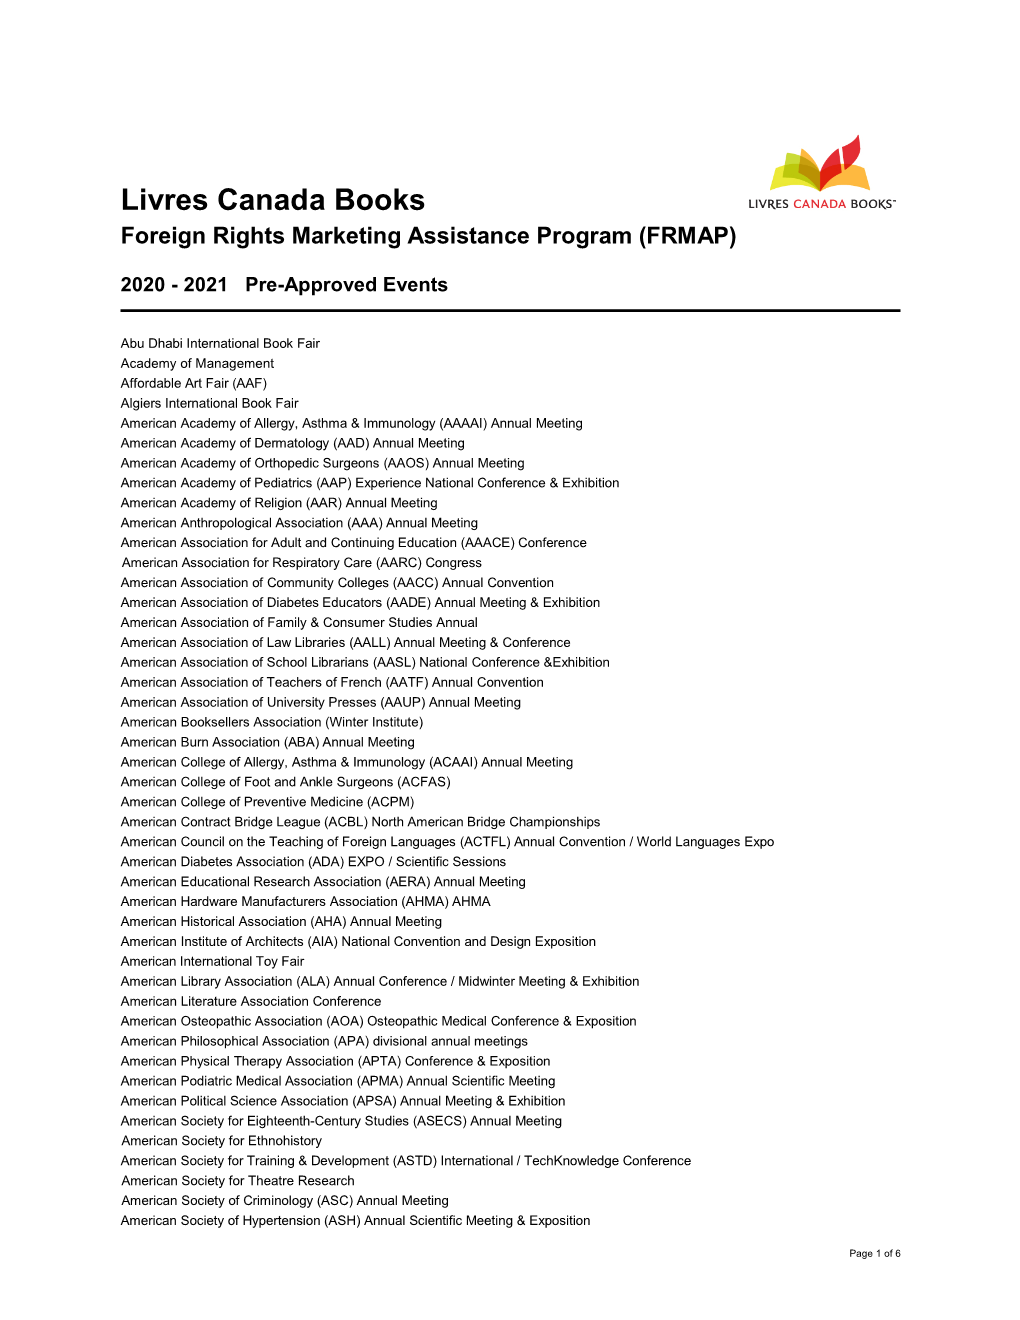 Livres Canada Books Foreign Rights Marketing Assistance Program (FRMAP)